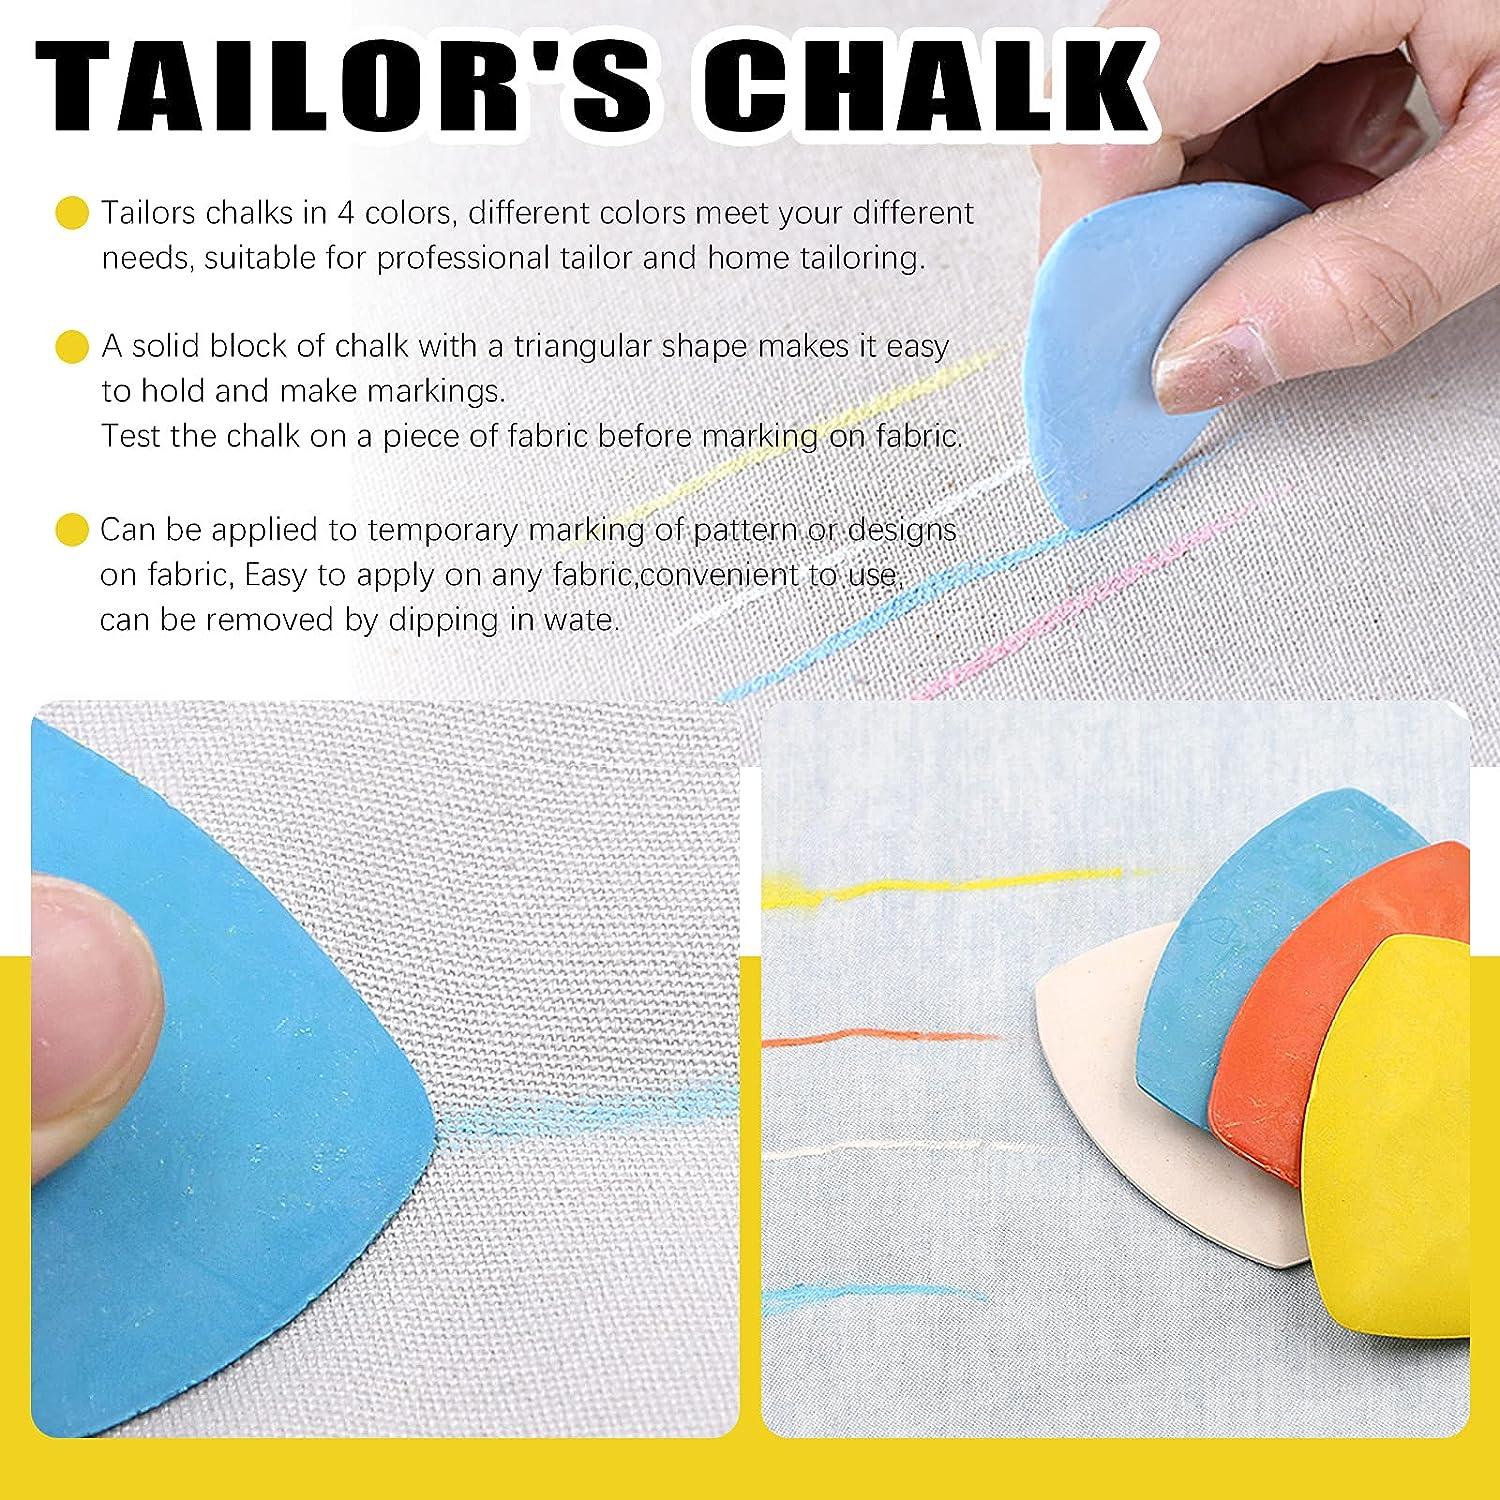 10PCS Professional Tailor Chalk Fabric Chalk for Sewing Tailors Chalk Fabric  Markers for Sewing Fabric Chalk Sewing Wax Based Tailor's Chalk New 10PCS